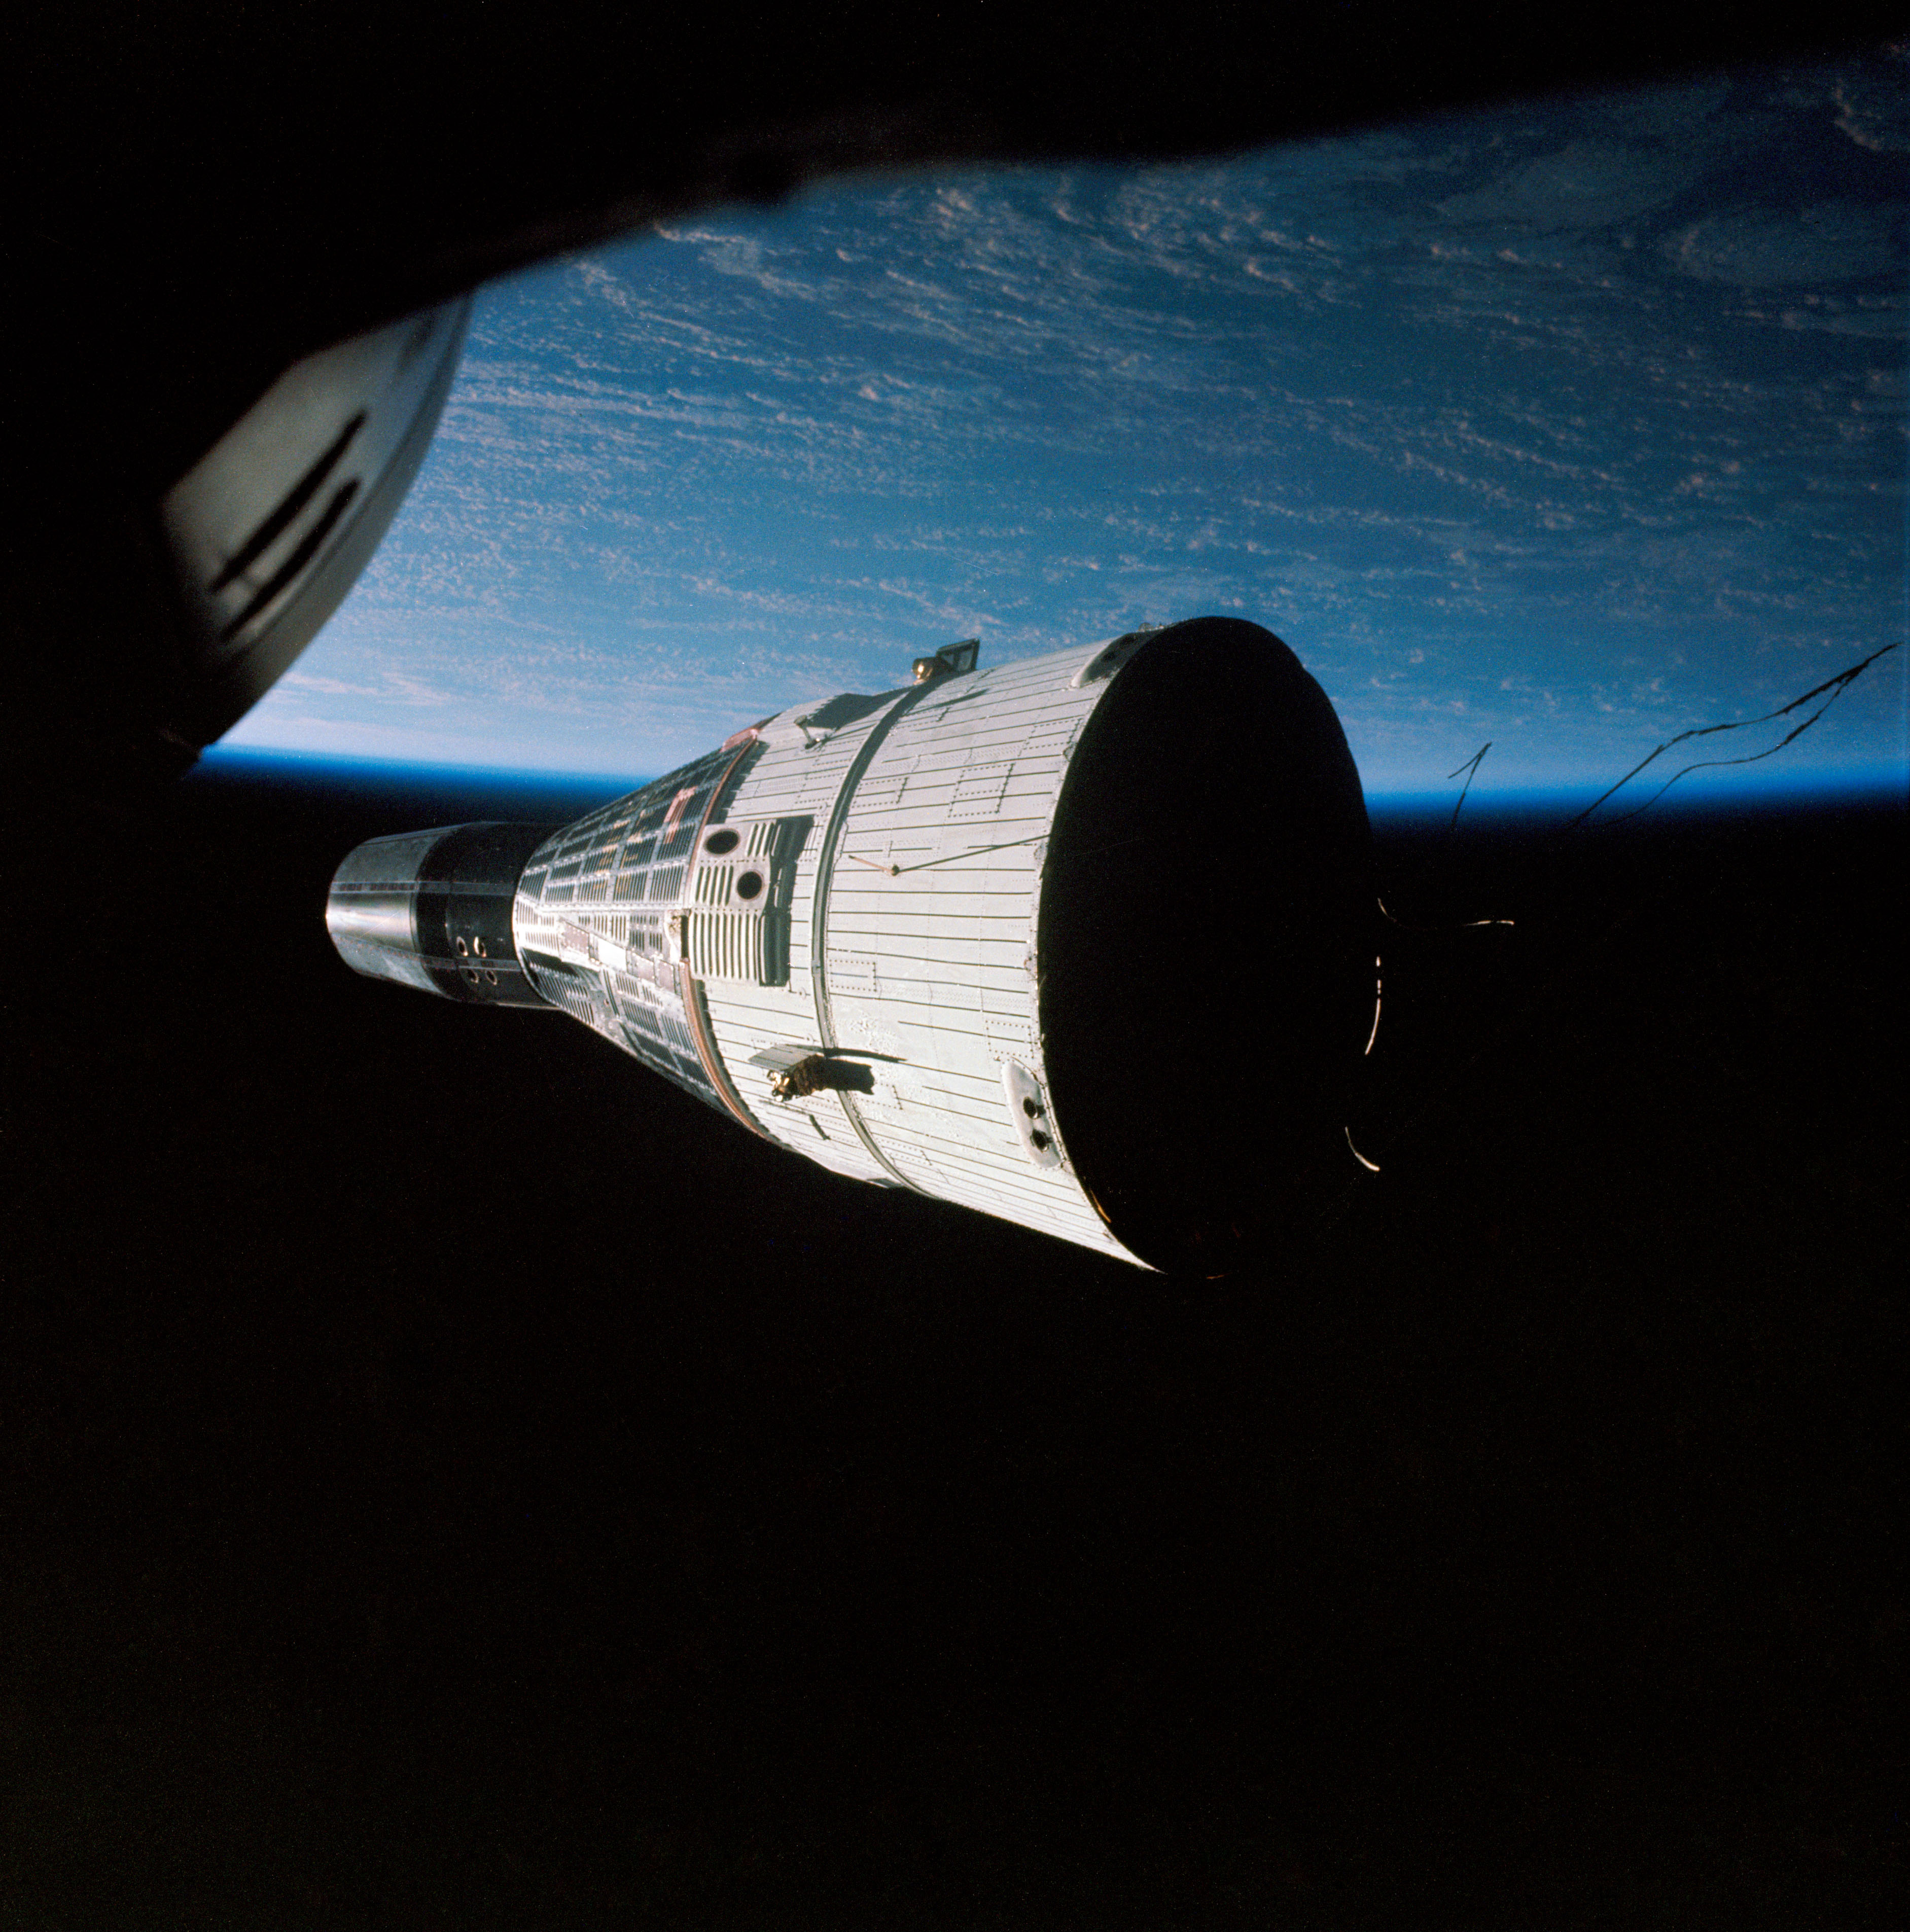 Backdropped by the grandeur of Earth, Gemini VII drifts serenely in the inky darkness, as seen from Gemini VI-A. Photo Credit: NASA